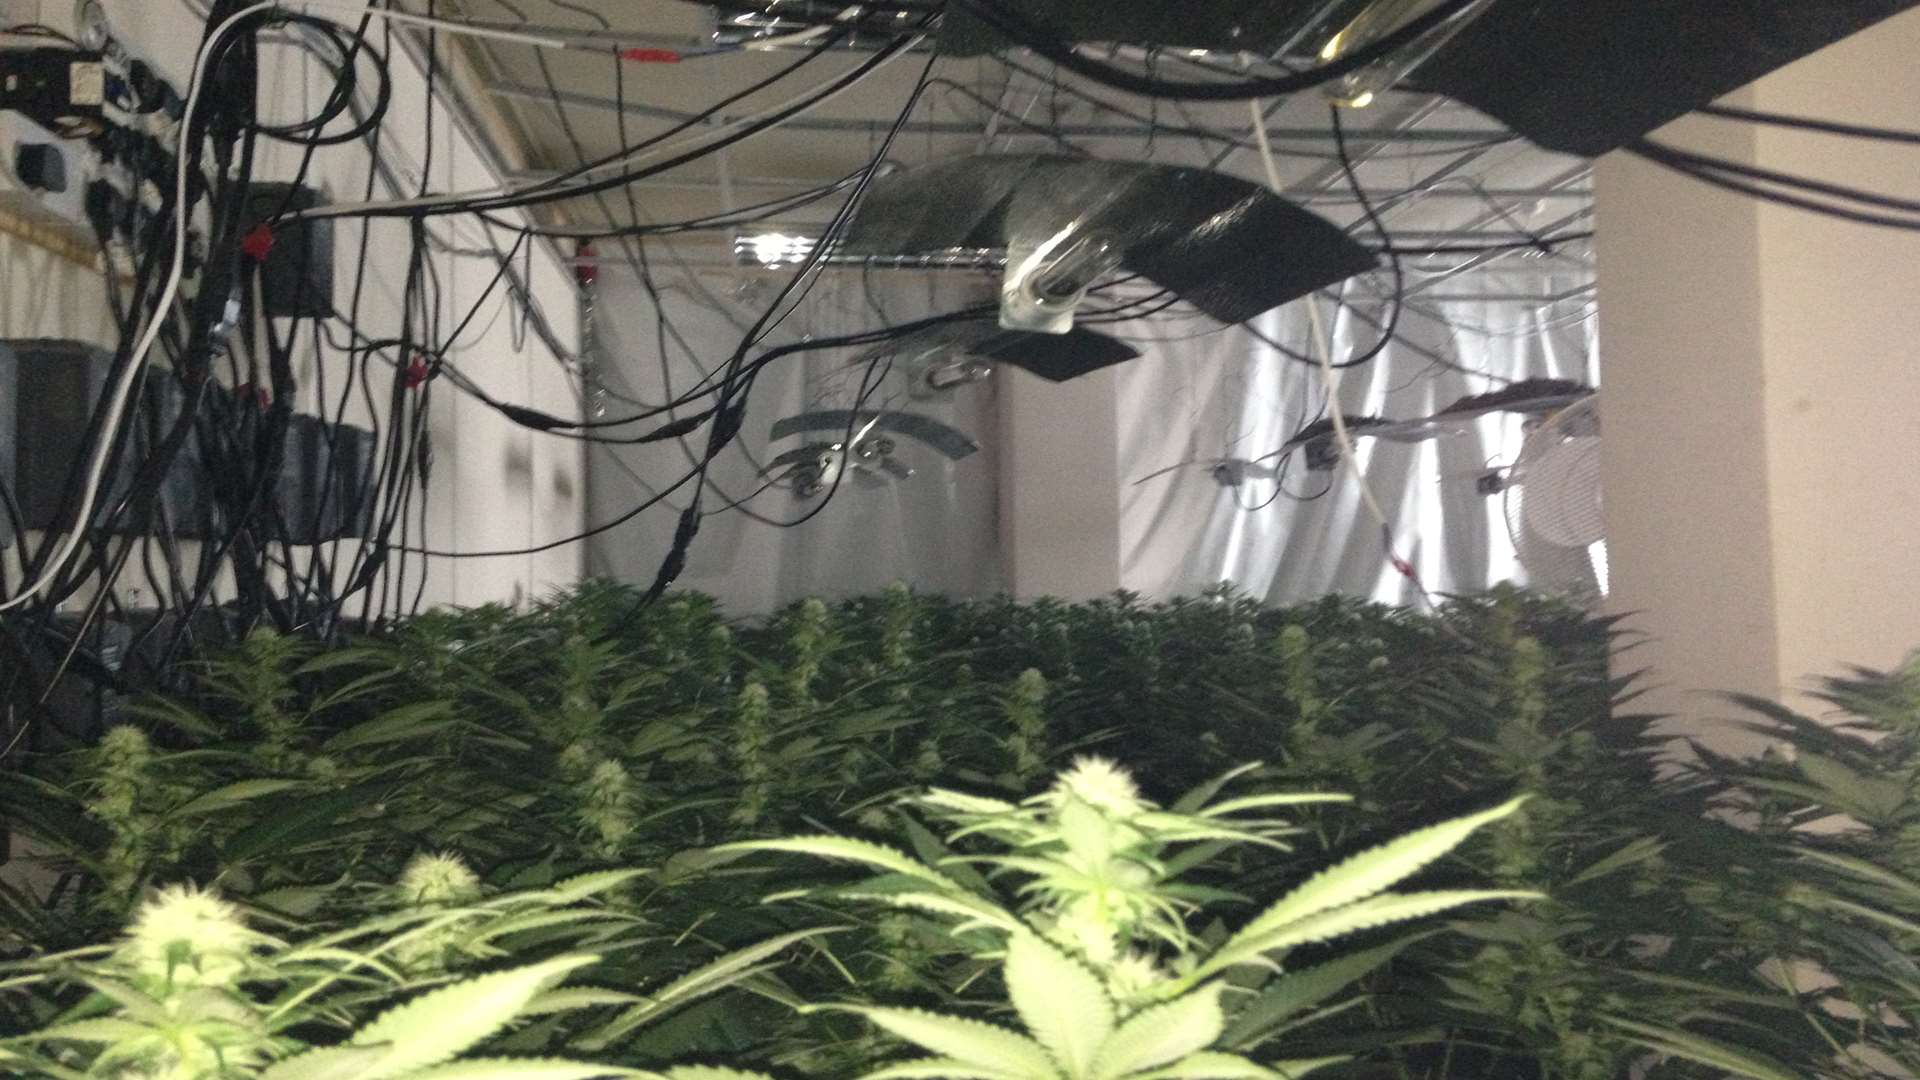 Police raided St Lawrence House on West Hill, Dartford and uncovered thousands of cannabis plants.